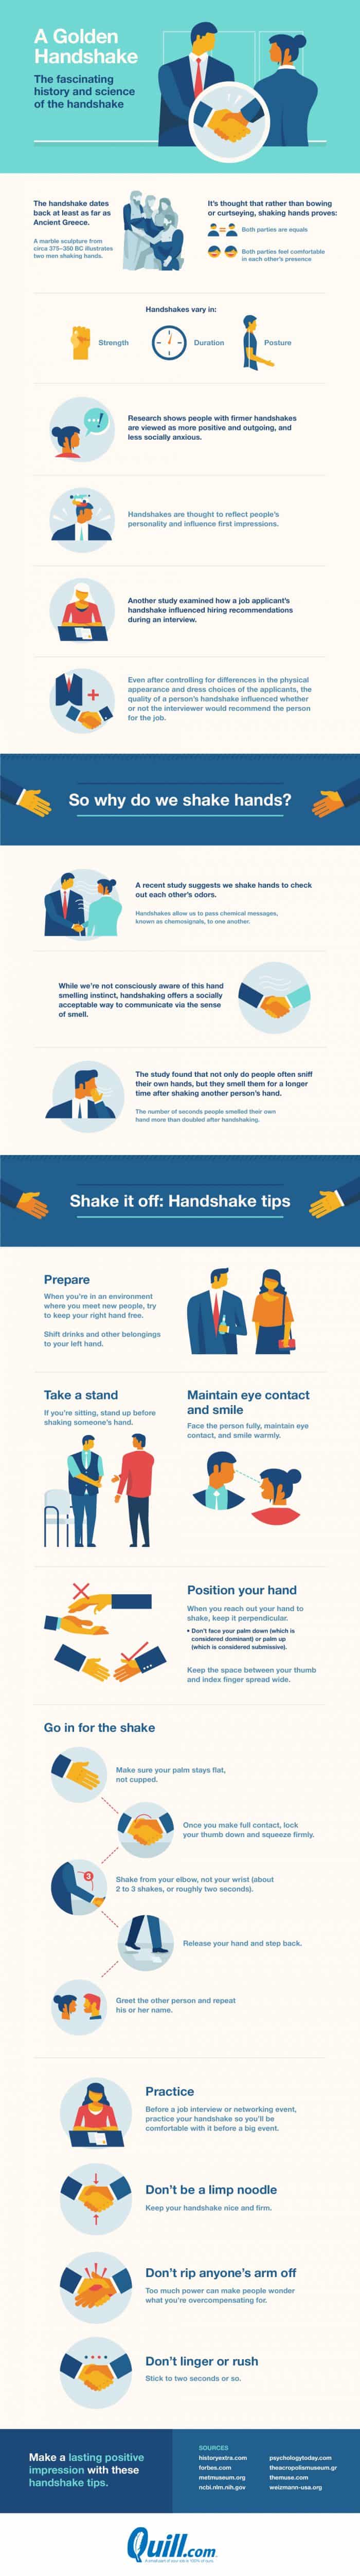 The Fascinating History Behind The Handshake